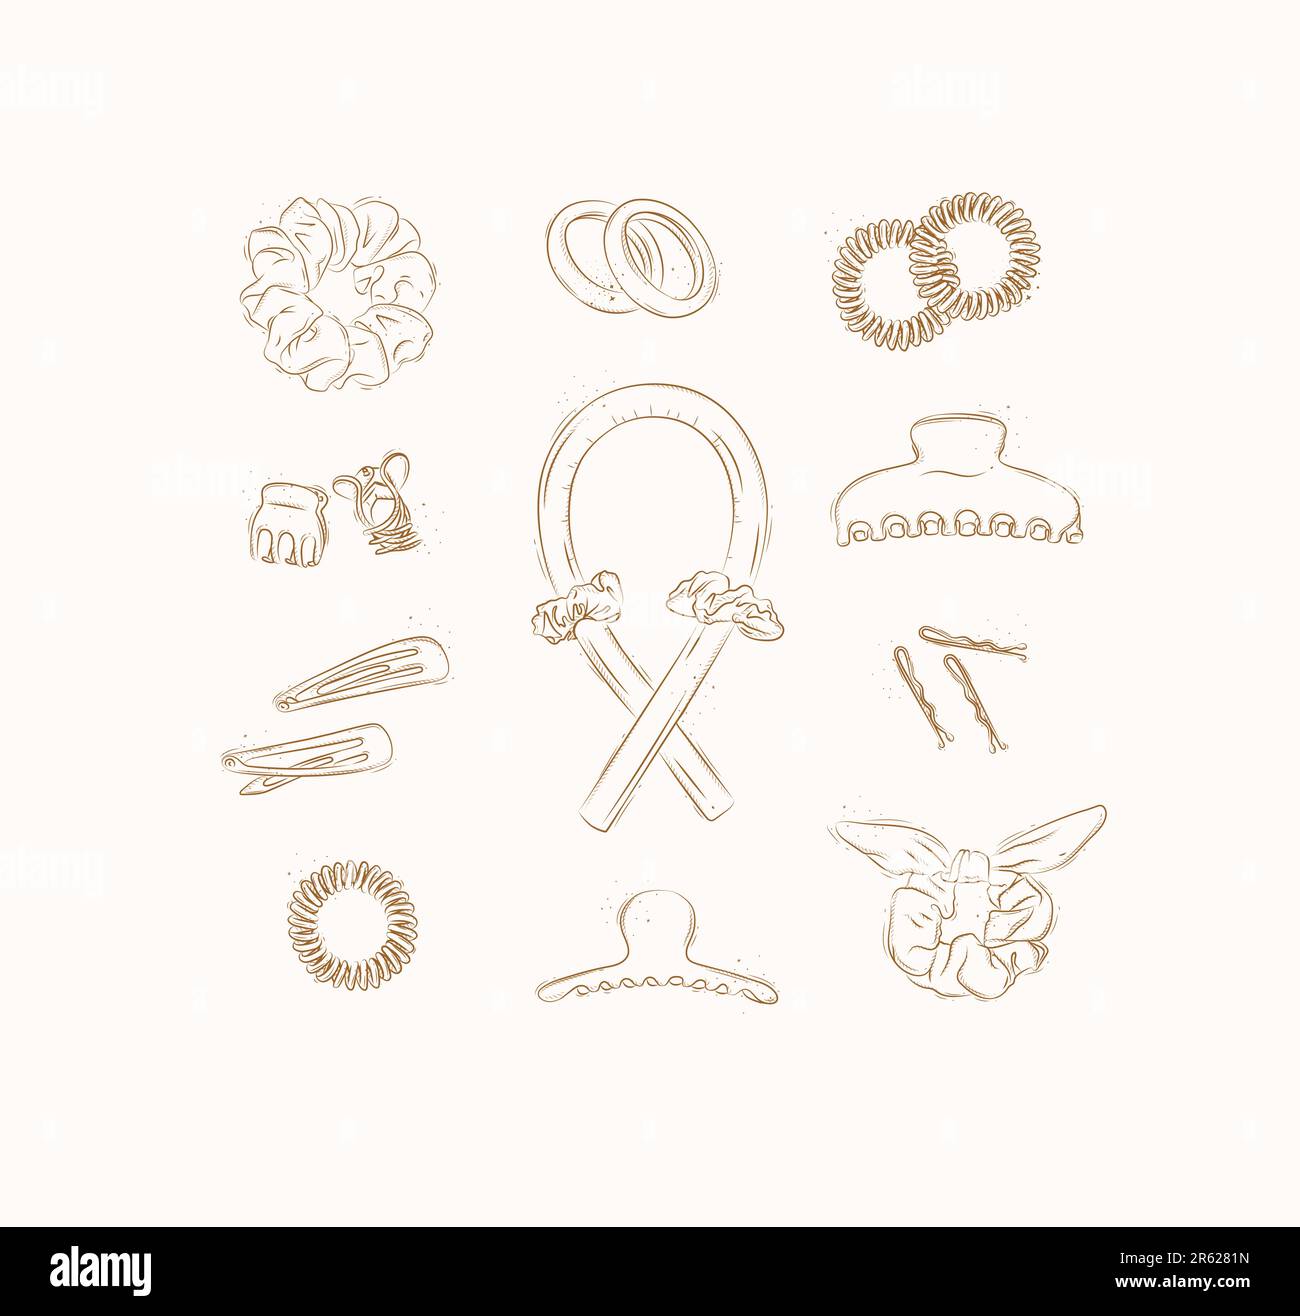 Elastic bands and hair clips collection drawing on brown background Stock Vector